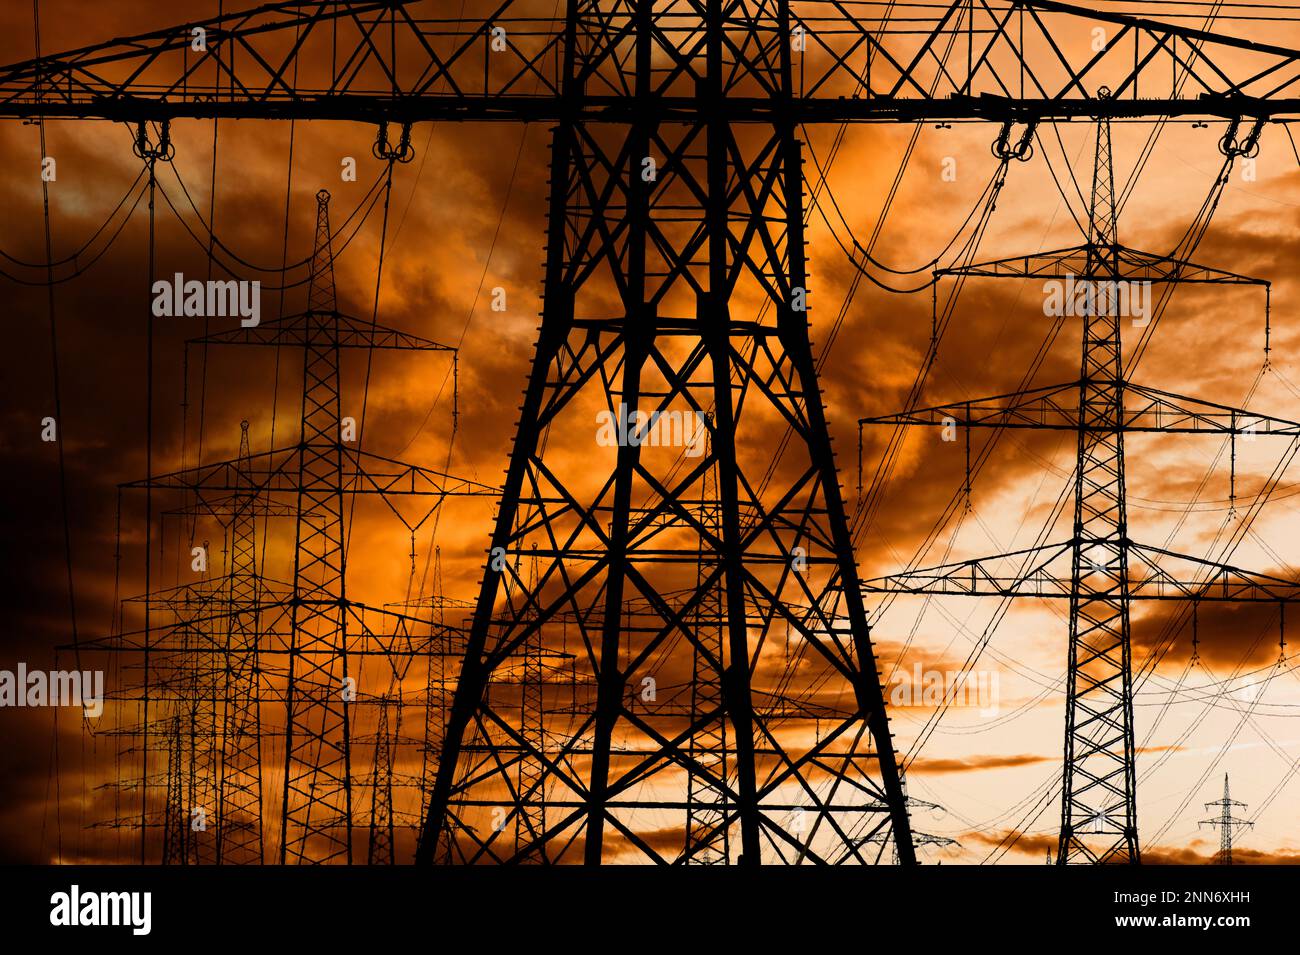 high voltage pylons for electricity and power against sky with dramatic clouds Stock Photo